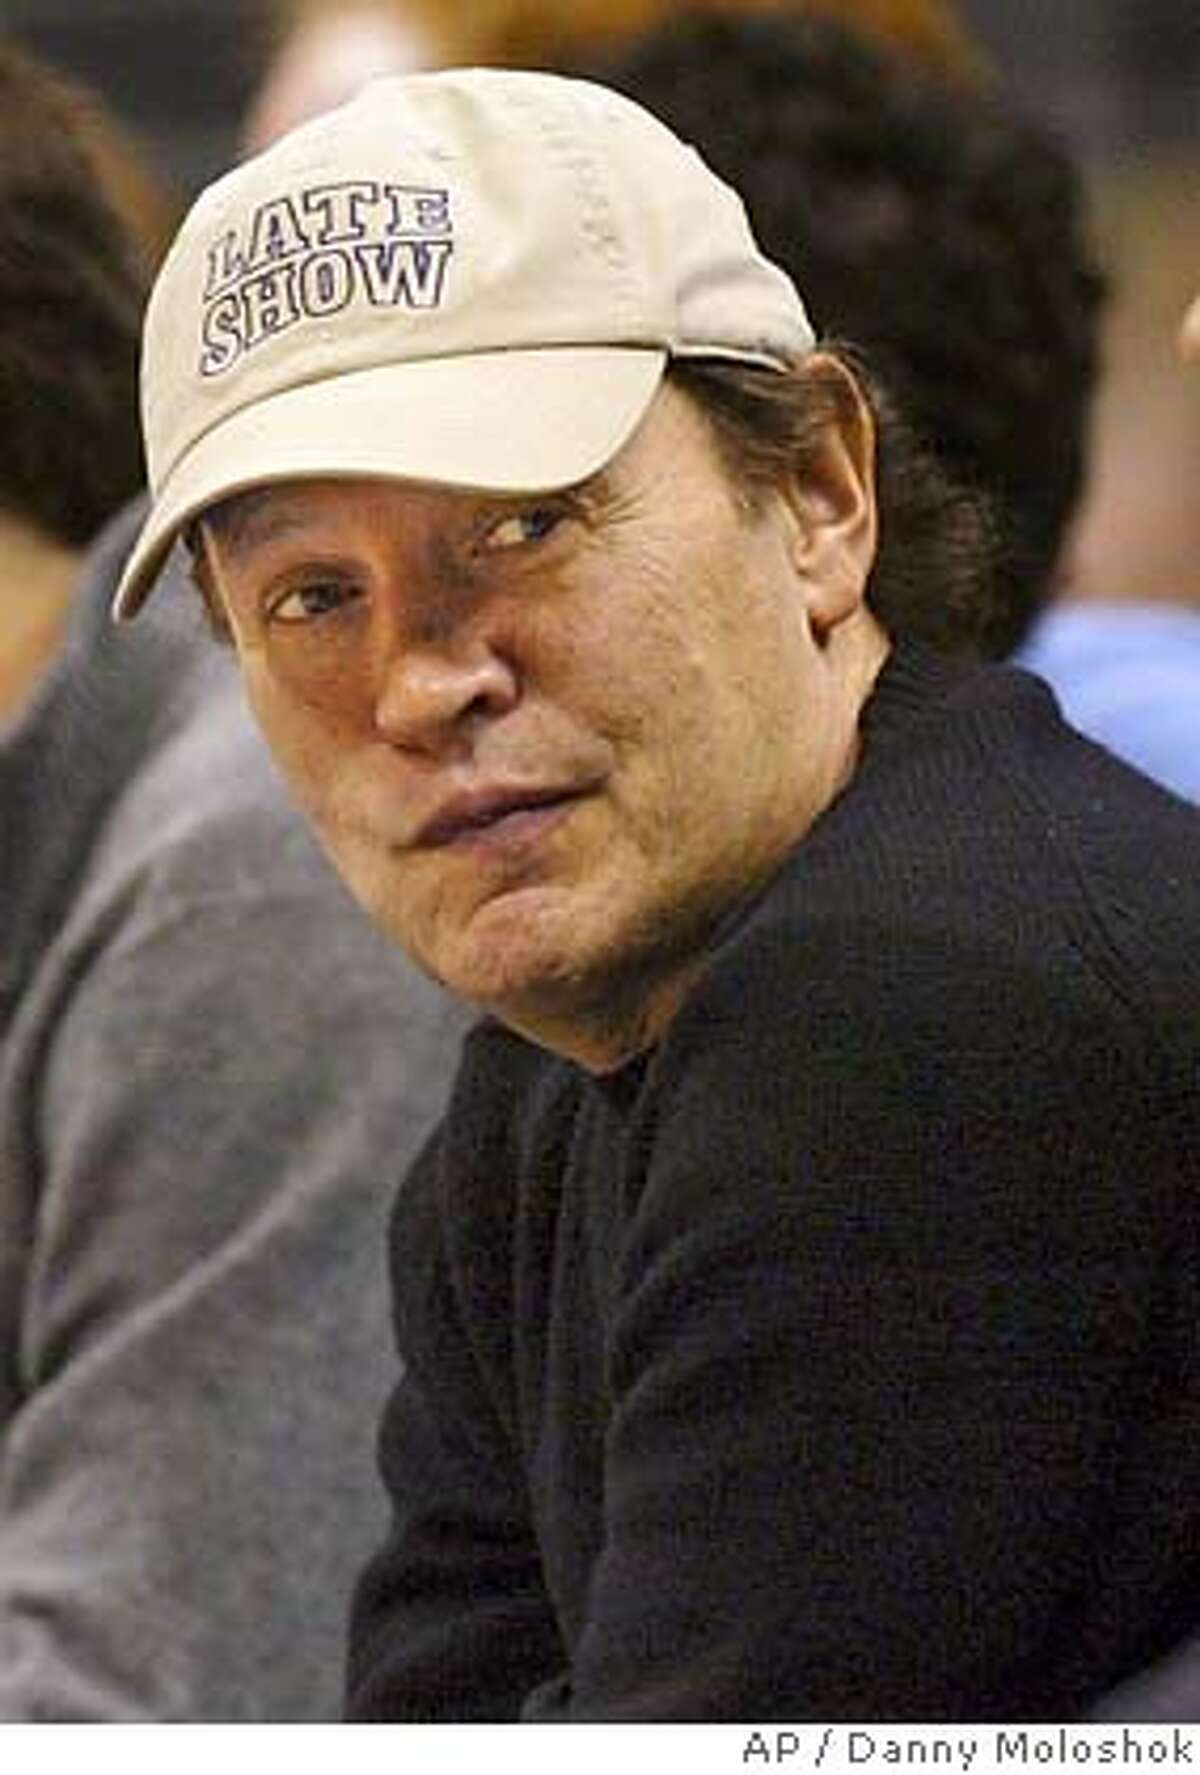 Actor and comedian Billy Crystal is seen during the NBA game between the Los Angeles Clippers and Toronto Raptors Wednesday, Nov. 23, 2005, in Los Angeles. The Clippers won 103-100. (AP Photo/Danny Moloshok)